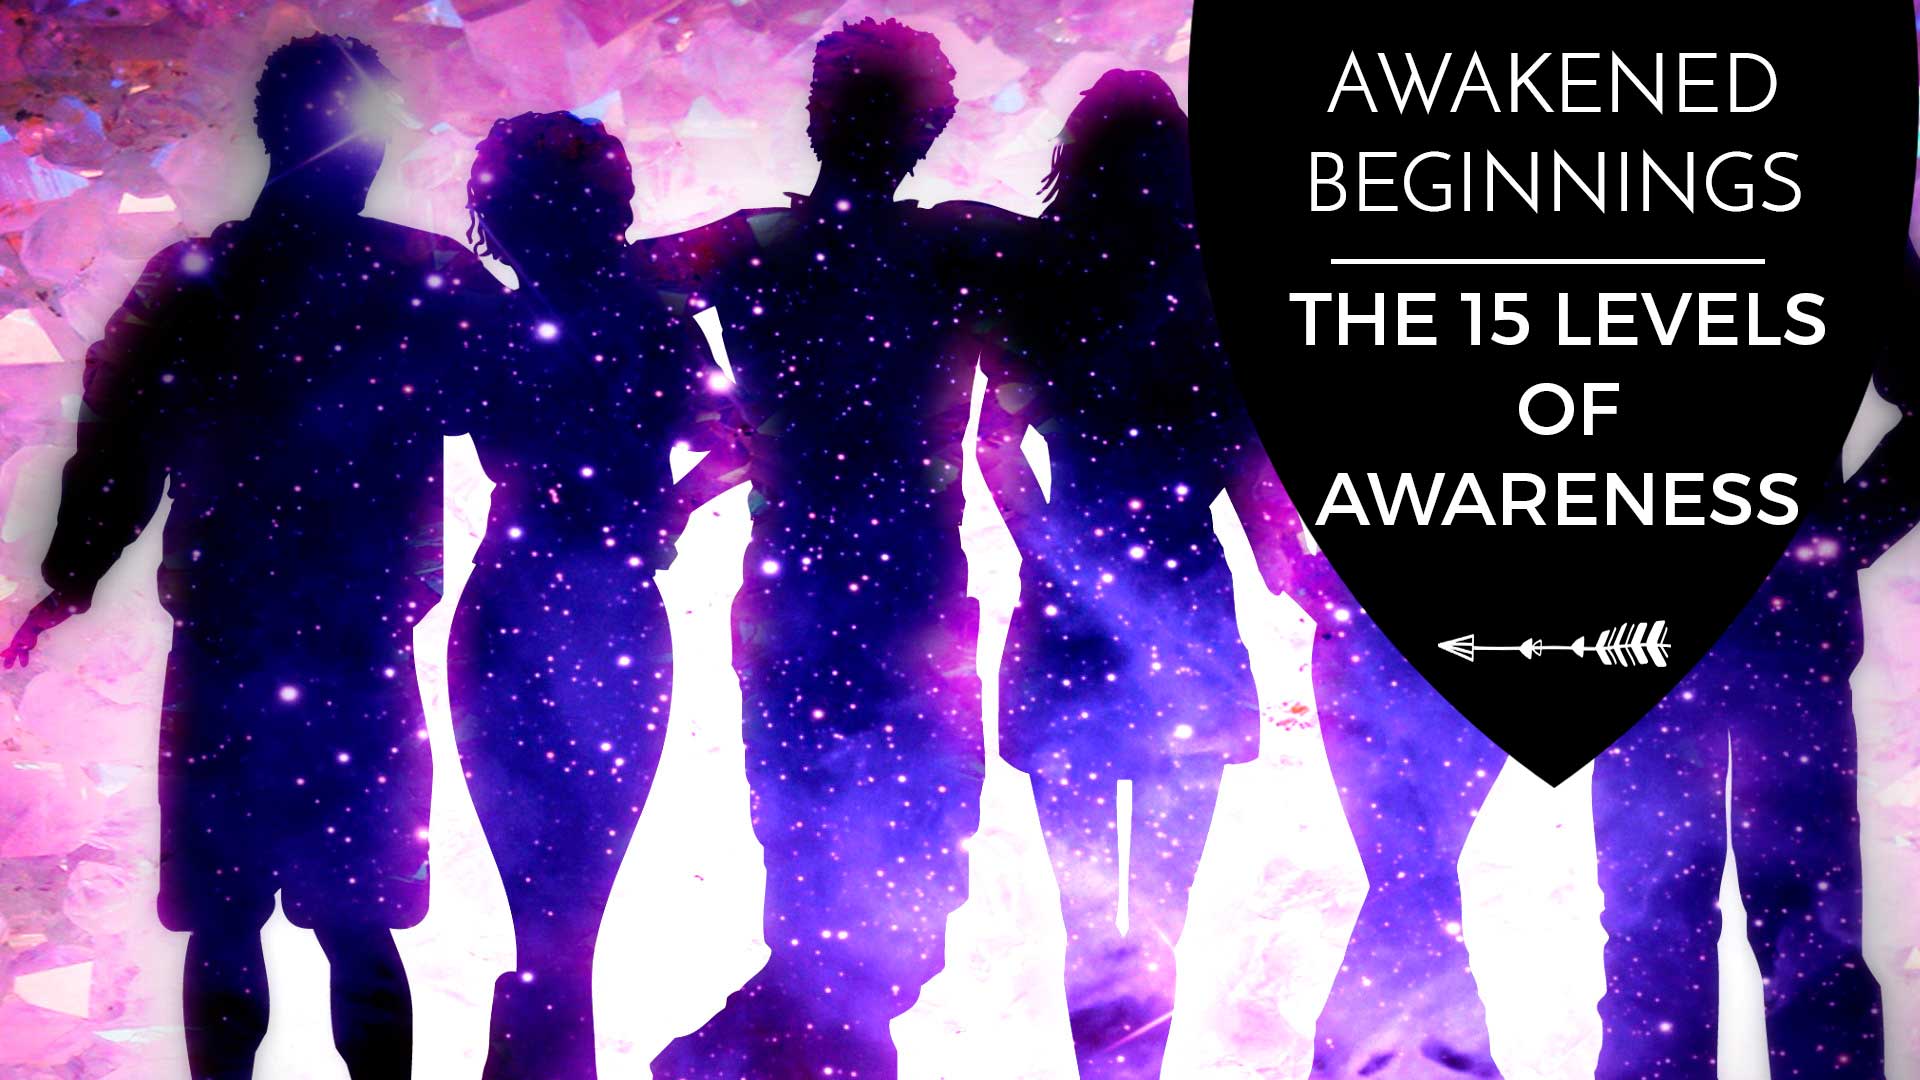 If you've been journeying with us through the Awakened Beginnings series, this is our final article on the series. Today's final Topic goes into the 15 levels of awareness! For a beginner series, I really wanted to step up my game and make it extremely unique rather than telling you about basic facts like chakras, astral projection or something you could read in a book anyway. Therefore for the Awakened Beginning series, I decided to create this based around my own experiences to understand oneness on the Path of Awakening and how I became able to consciously let go of the illusion of separation. Check out the 15 levels of Awareness to see where you're at